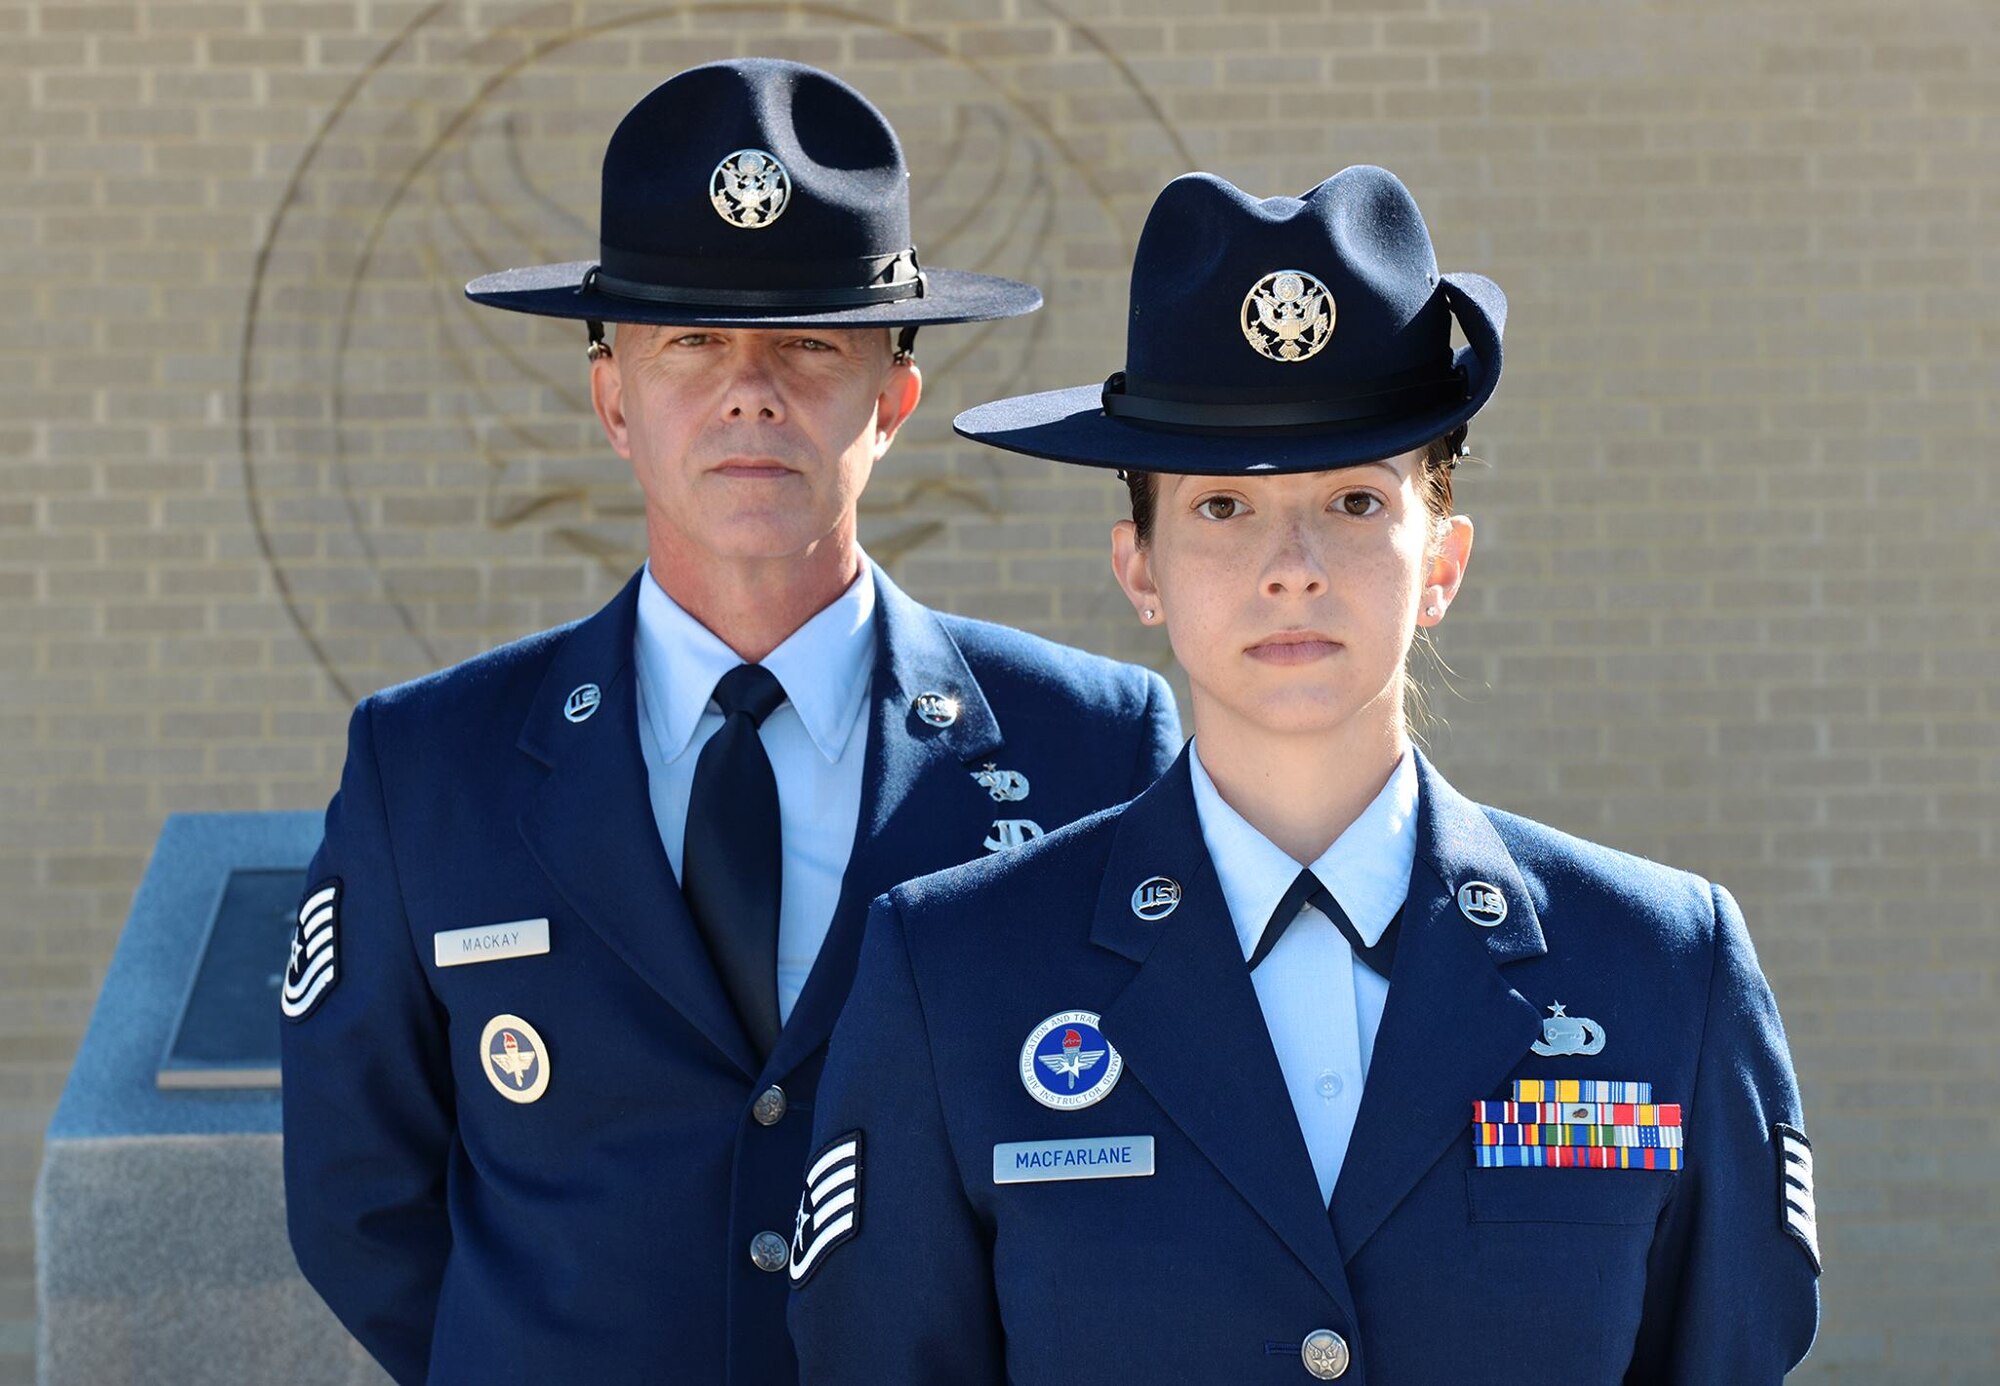 Tech. Sgt. James MacKay and his daughter, Staff Sgt. Amanda MacFarlane, 433rd Training Squadron military training instructors (MTI), pose for a photo on March 27, 2015, at Joint Base San Antonio-Lackland, Texas. MacKay and MacFarlane are the first father and daughter duo serving as MTIs at the same time. (U.S. Air Force photo/Benjamin Faske)